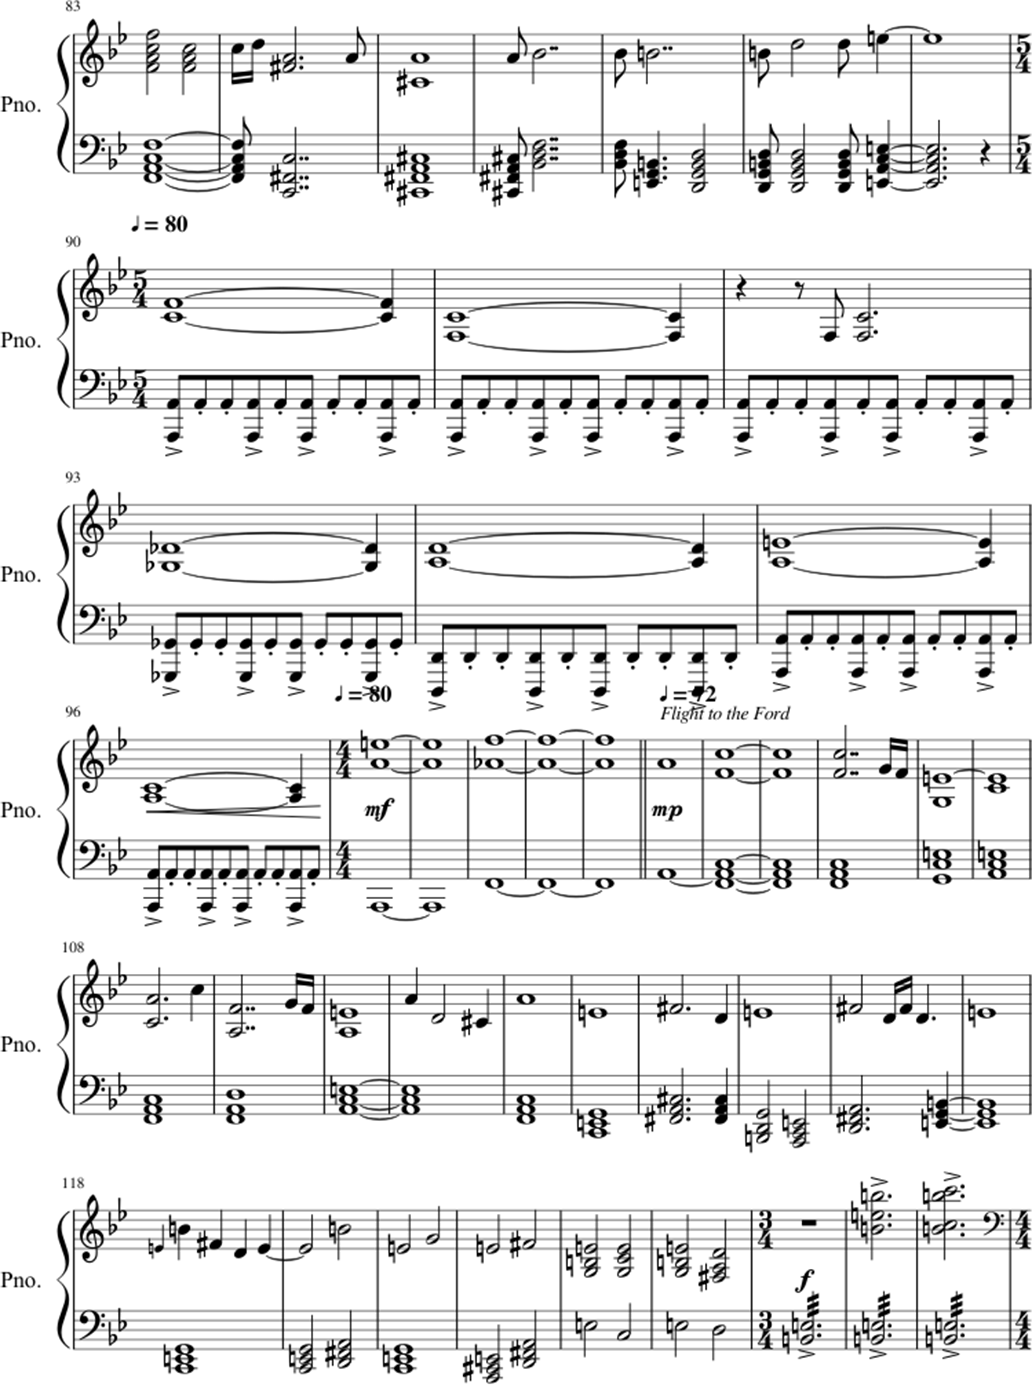 A knife in the dark sheet music notes 4